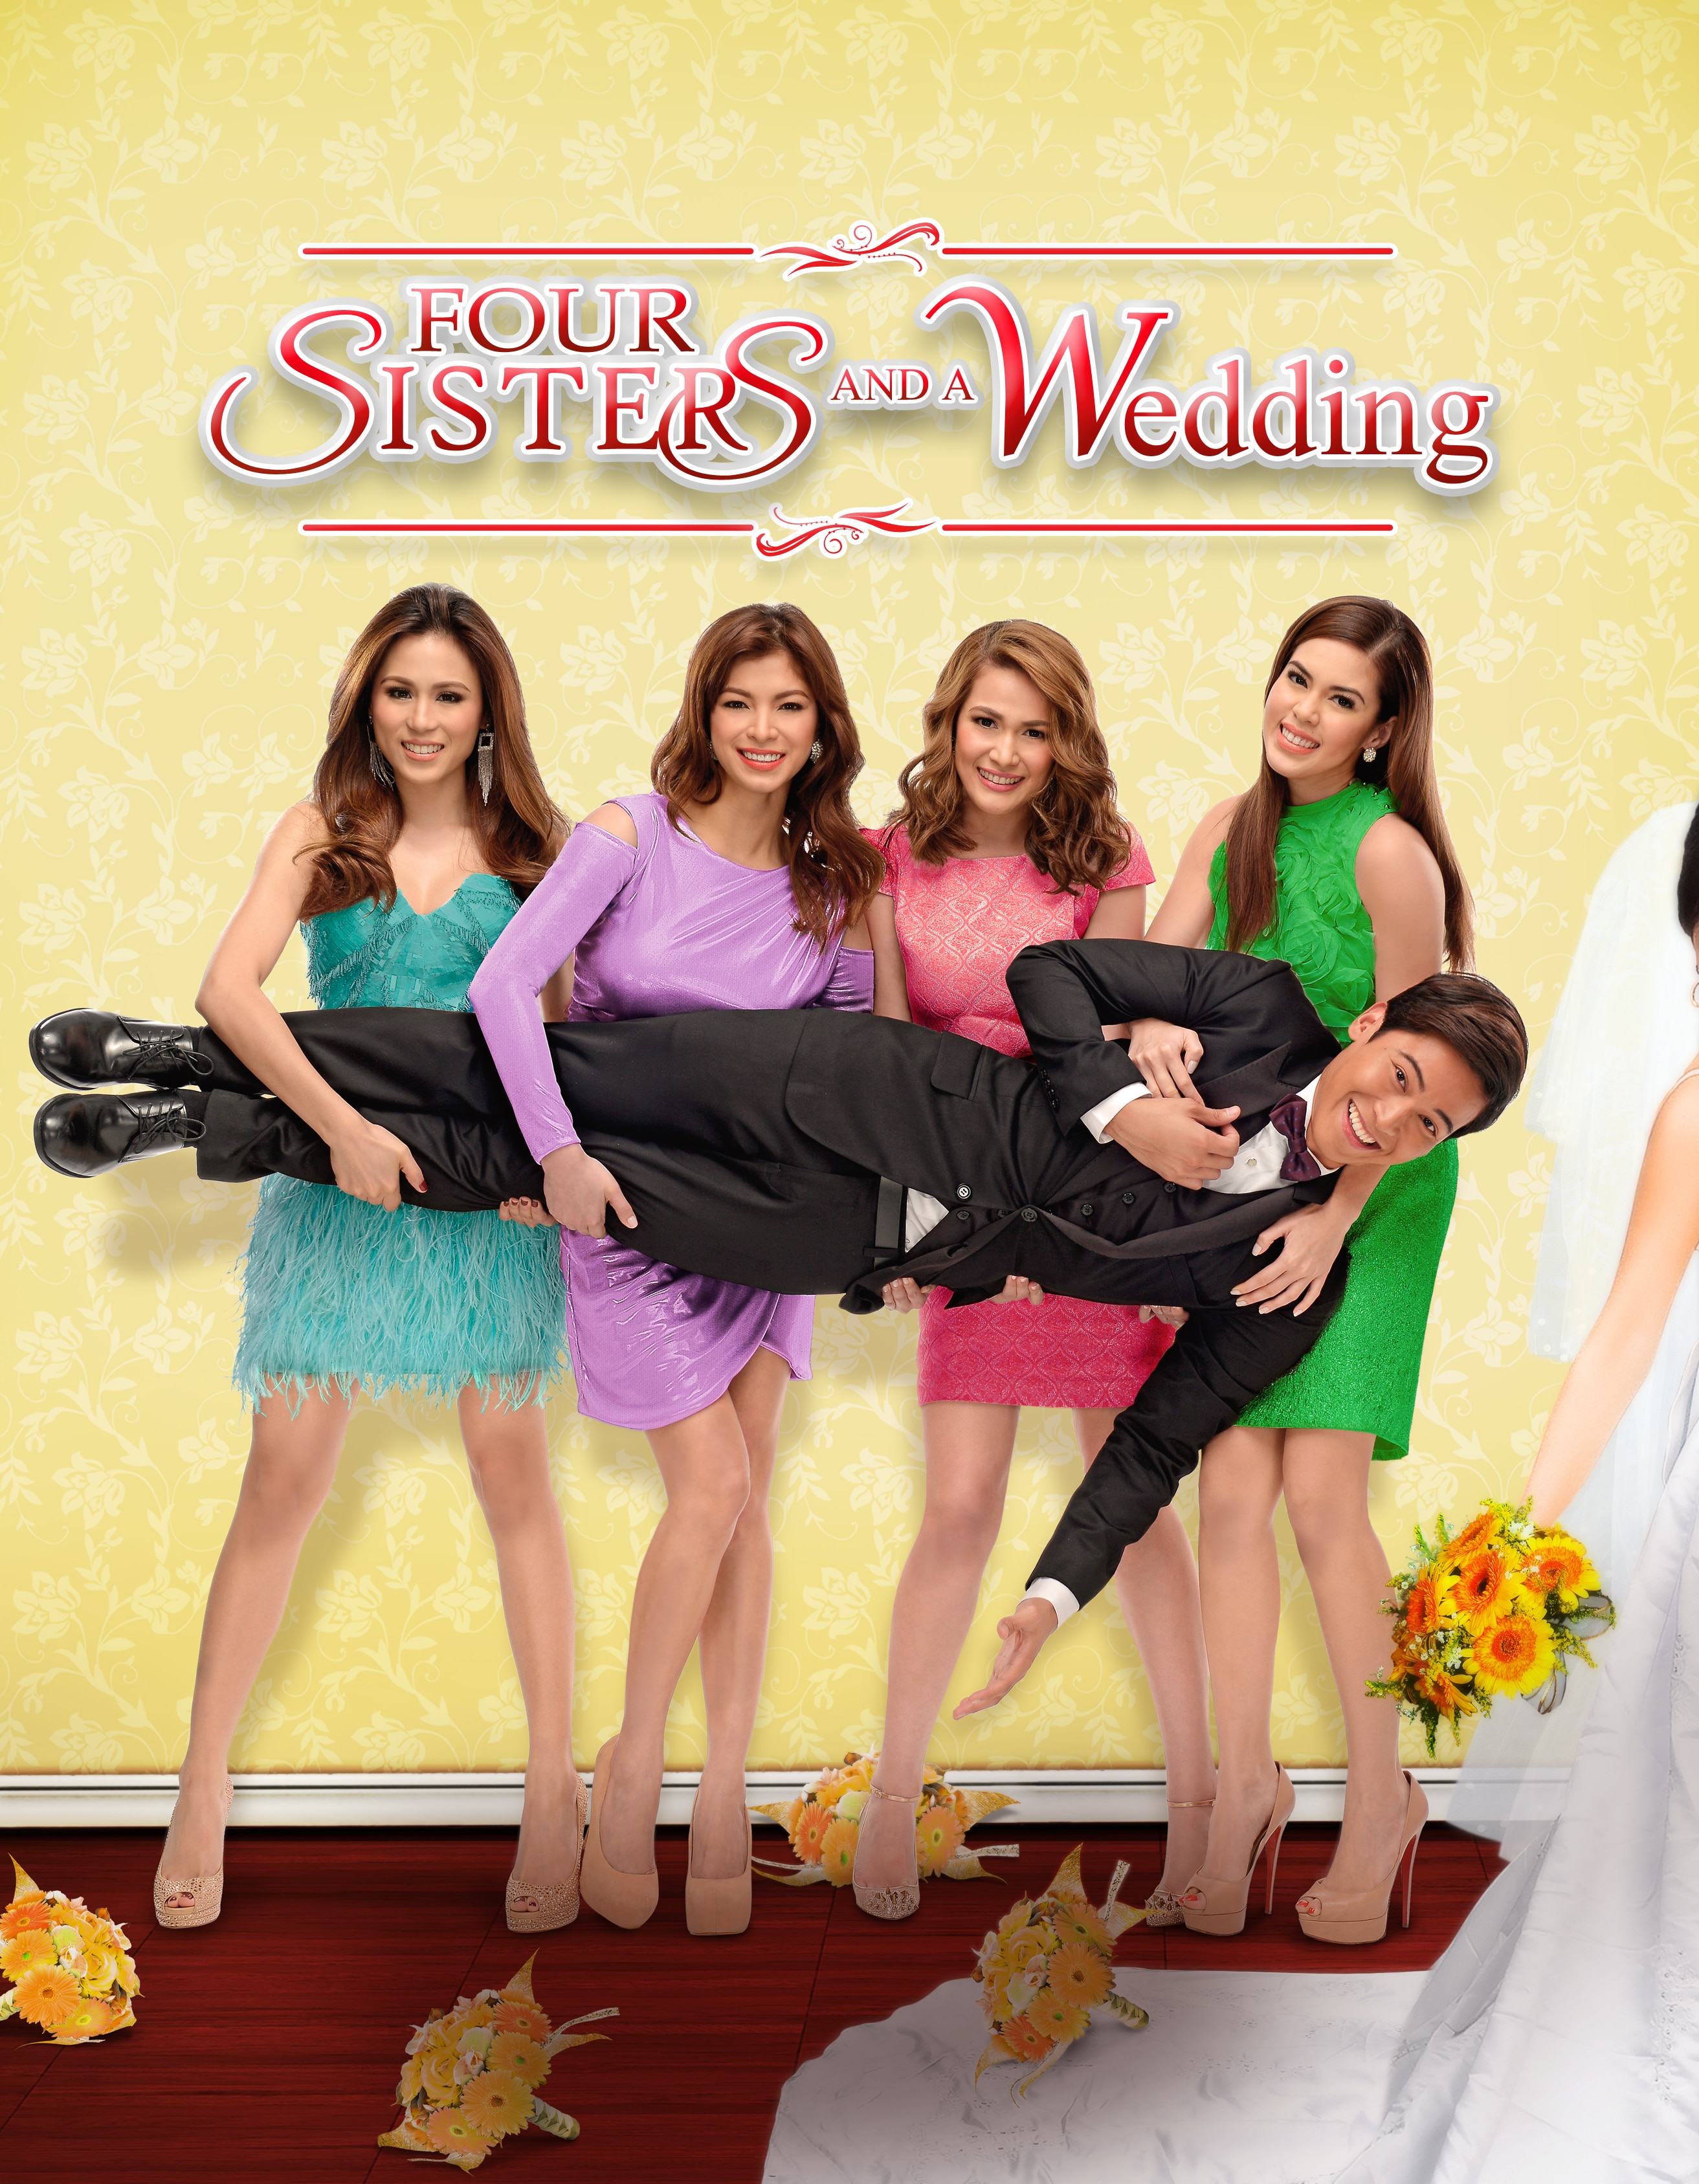 https://data-corporate.abs-cbn.com/corp/medialibrary/dotcom/isd_cast/298x442/four-sisters-and-a-wedding-poster-psd-(1).jpg?ext=.jpg